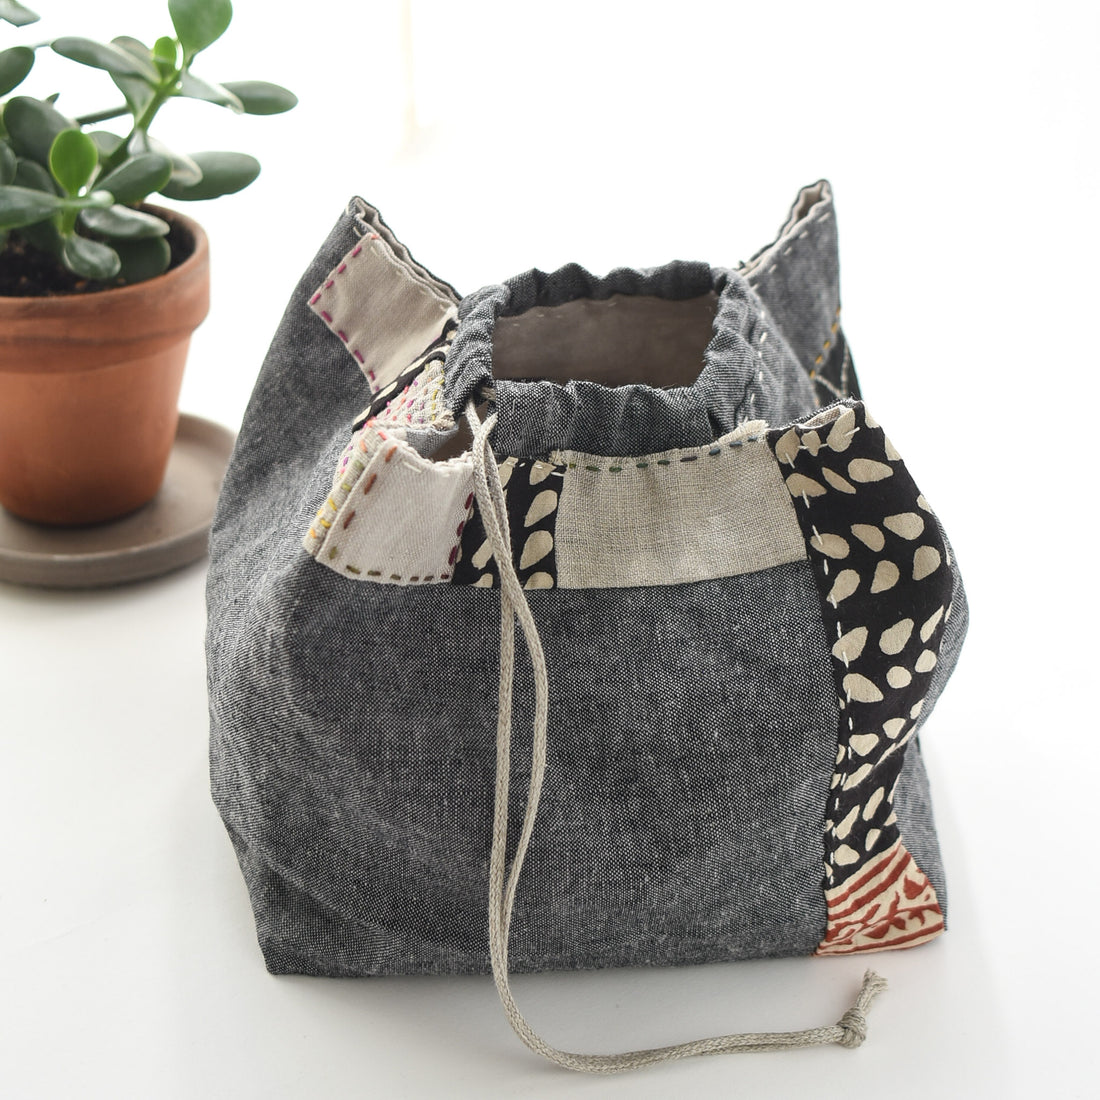 Fabric Pack for Modern Japanese Rice Pouch - Charcoal & Natural